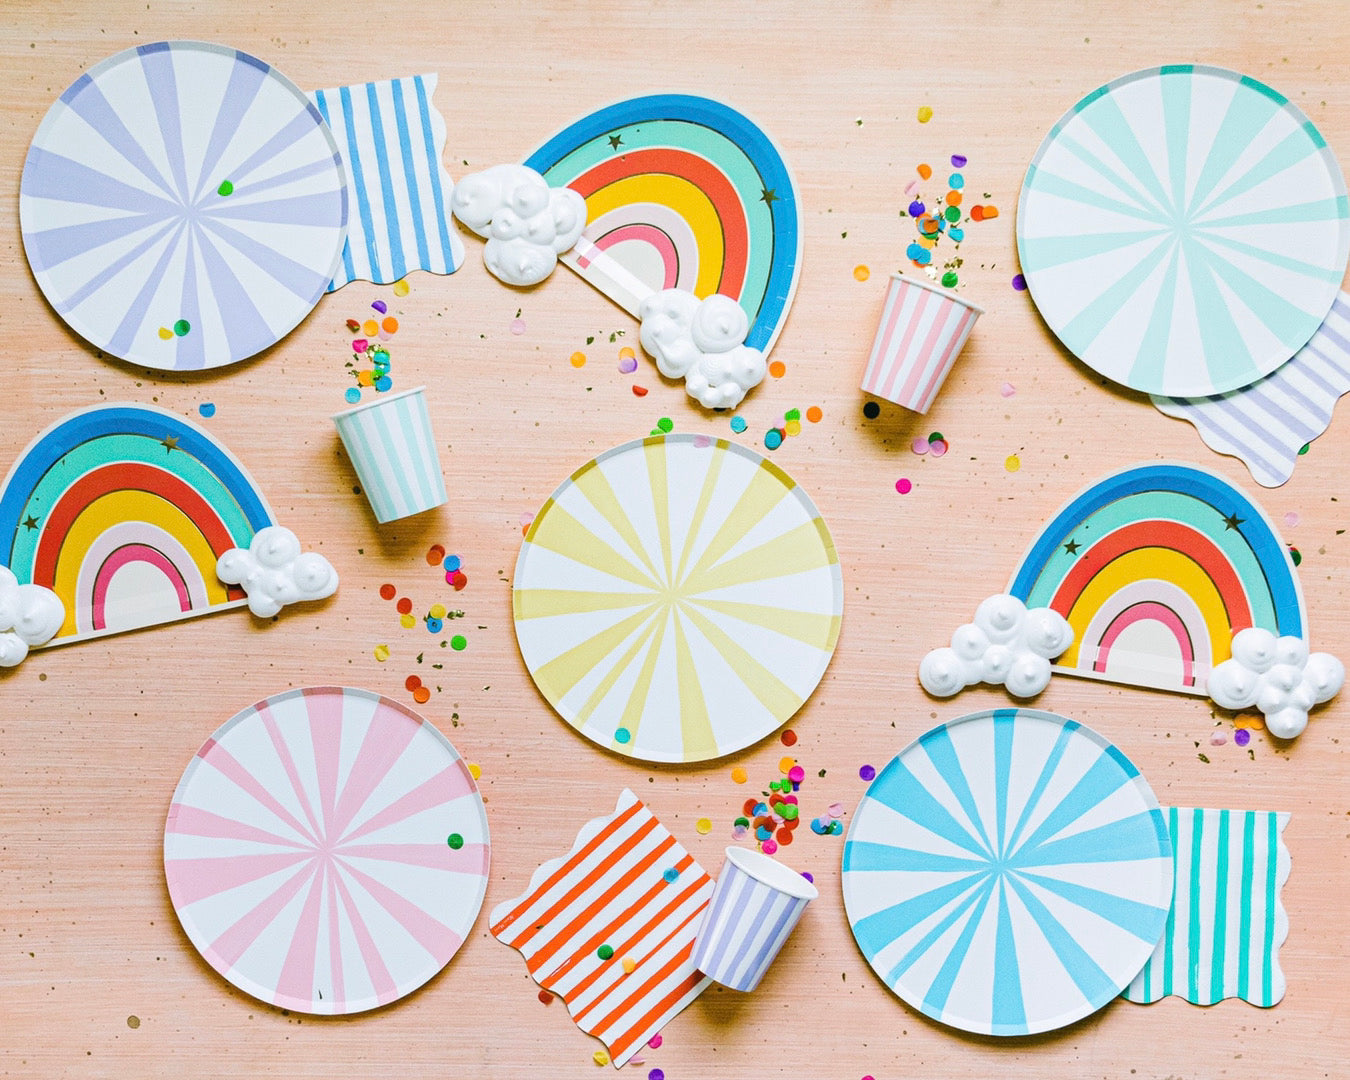 Rainbow party supplies to use for any rainbow theme party.